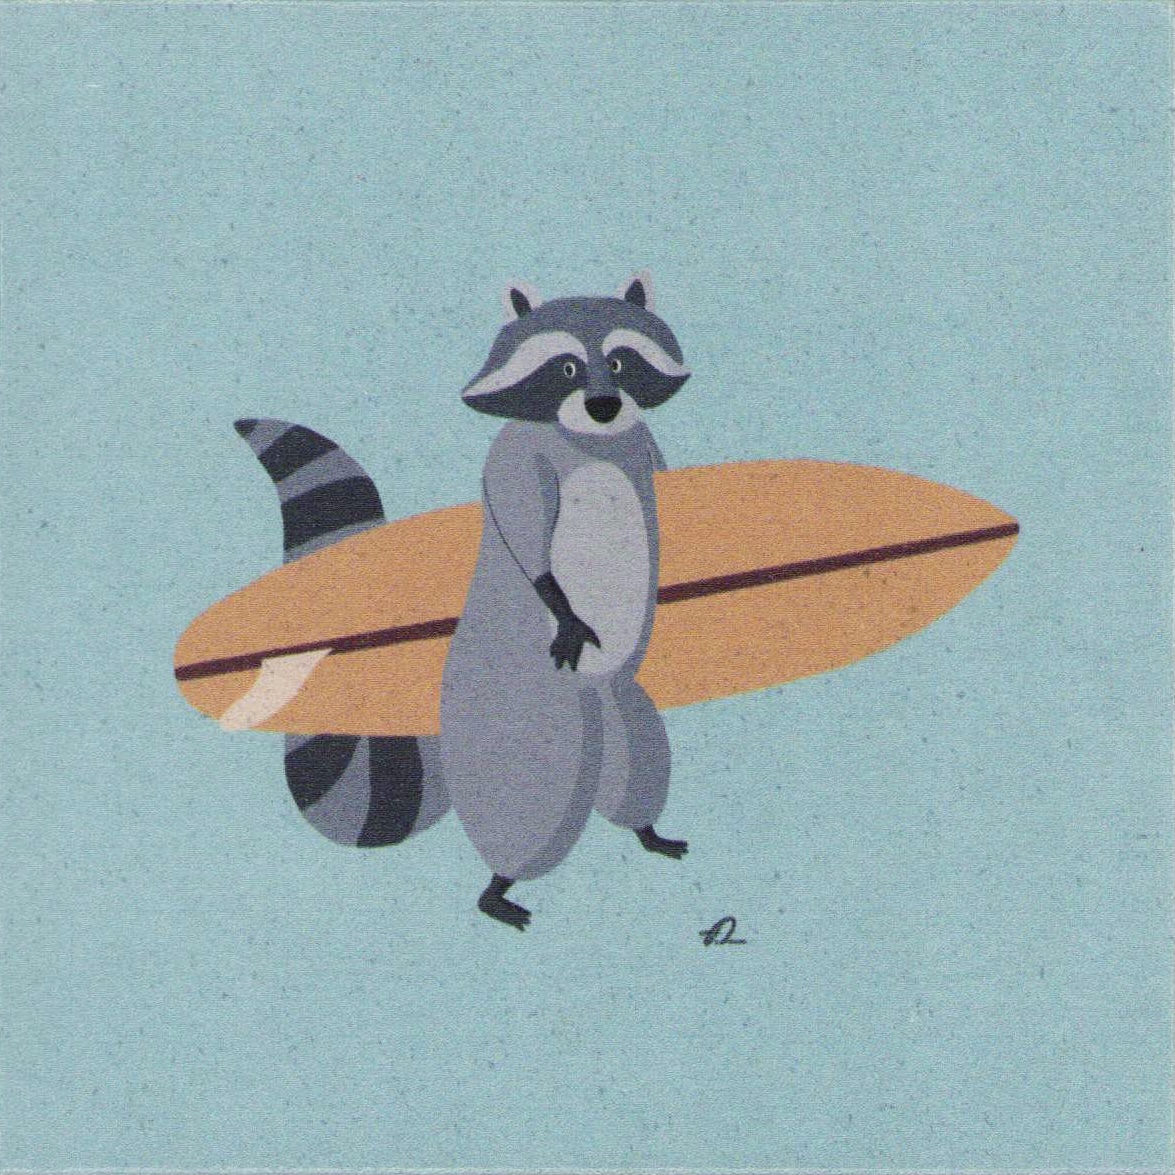 Surfing Racoon / 正 / open / S